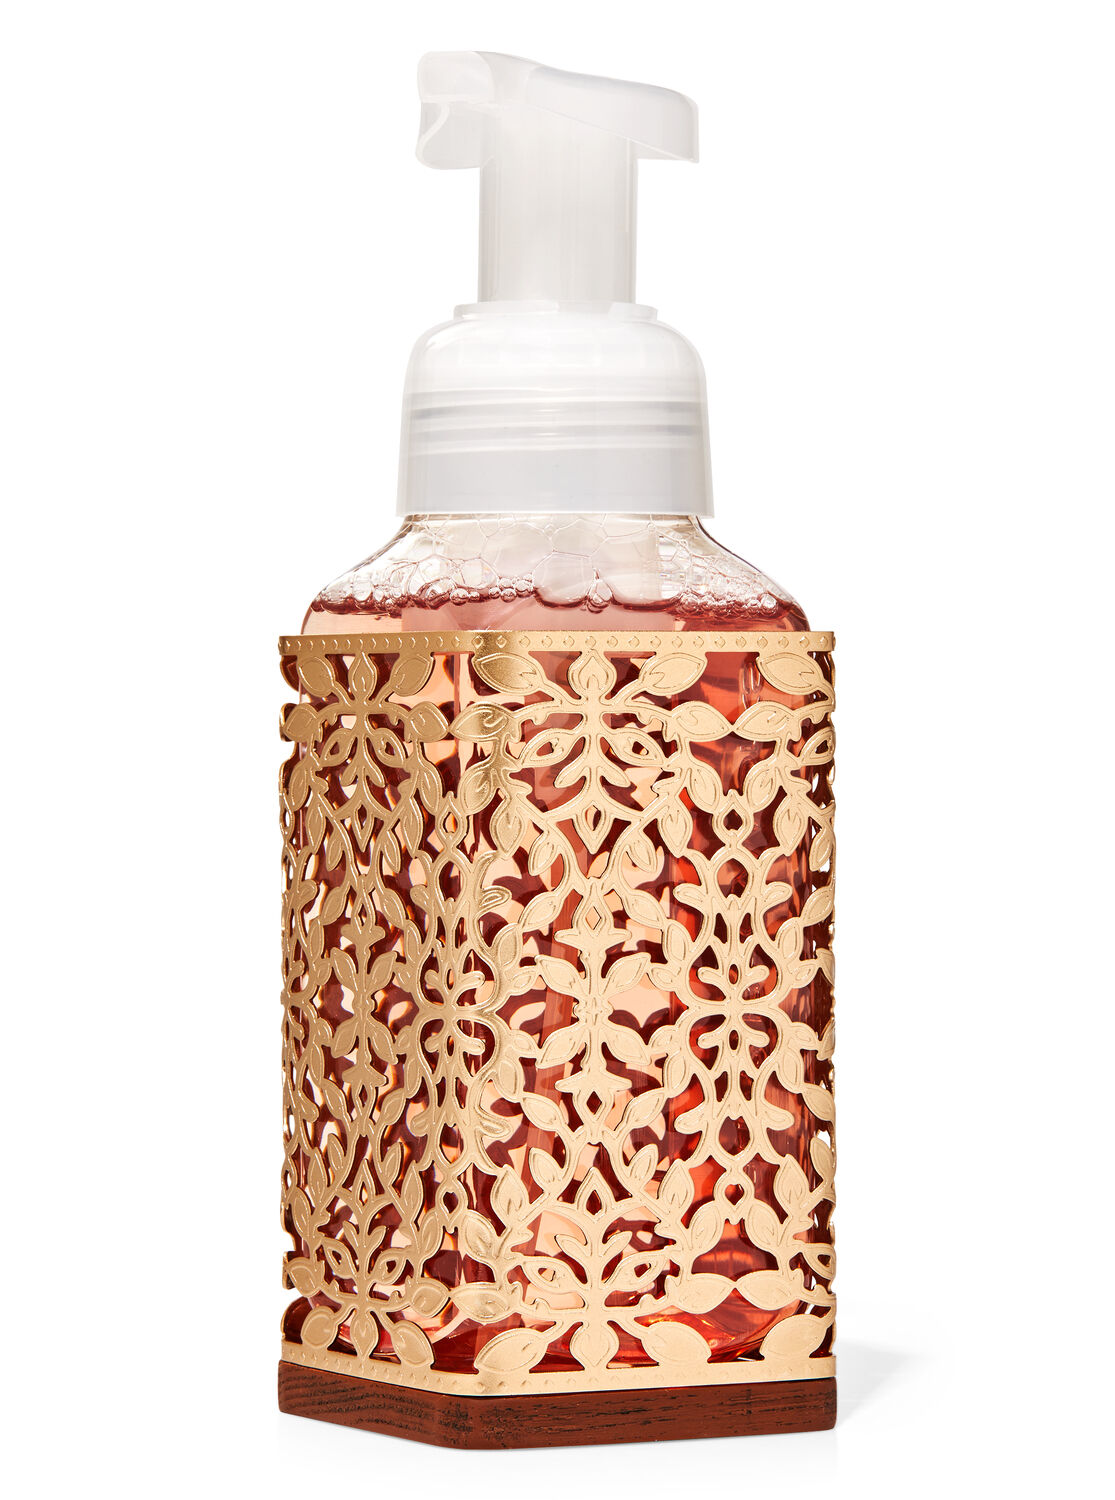 Bath Body Works ROSE GOLD GEOMETRIC Foaming Cleansing Hand Soap Holder Sleeve